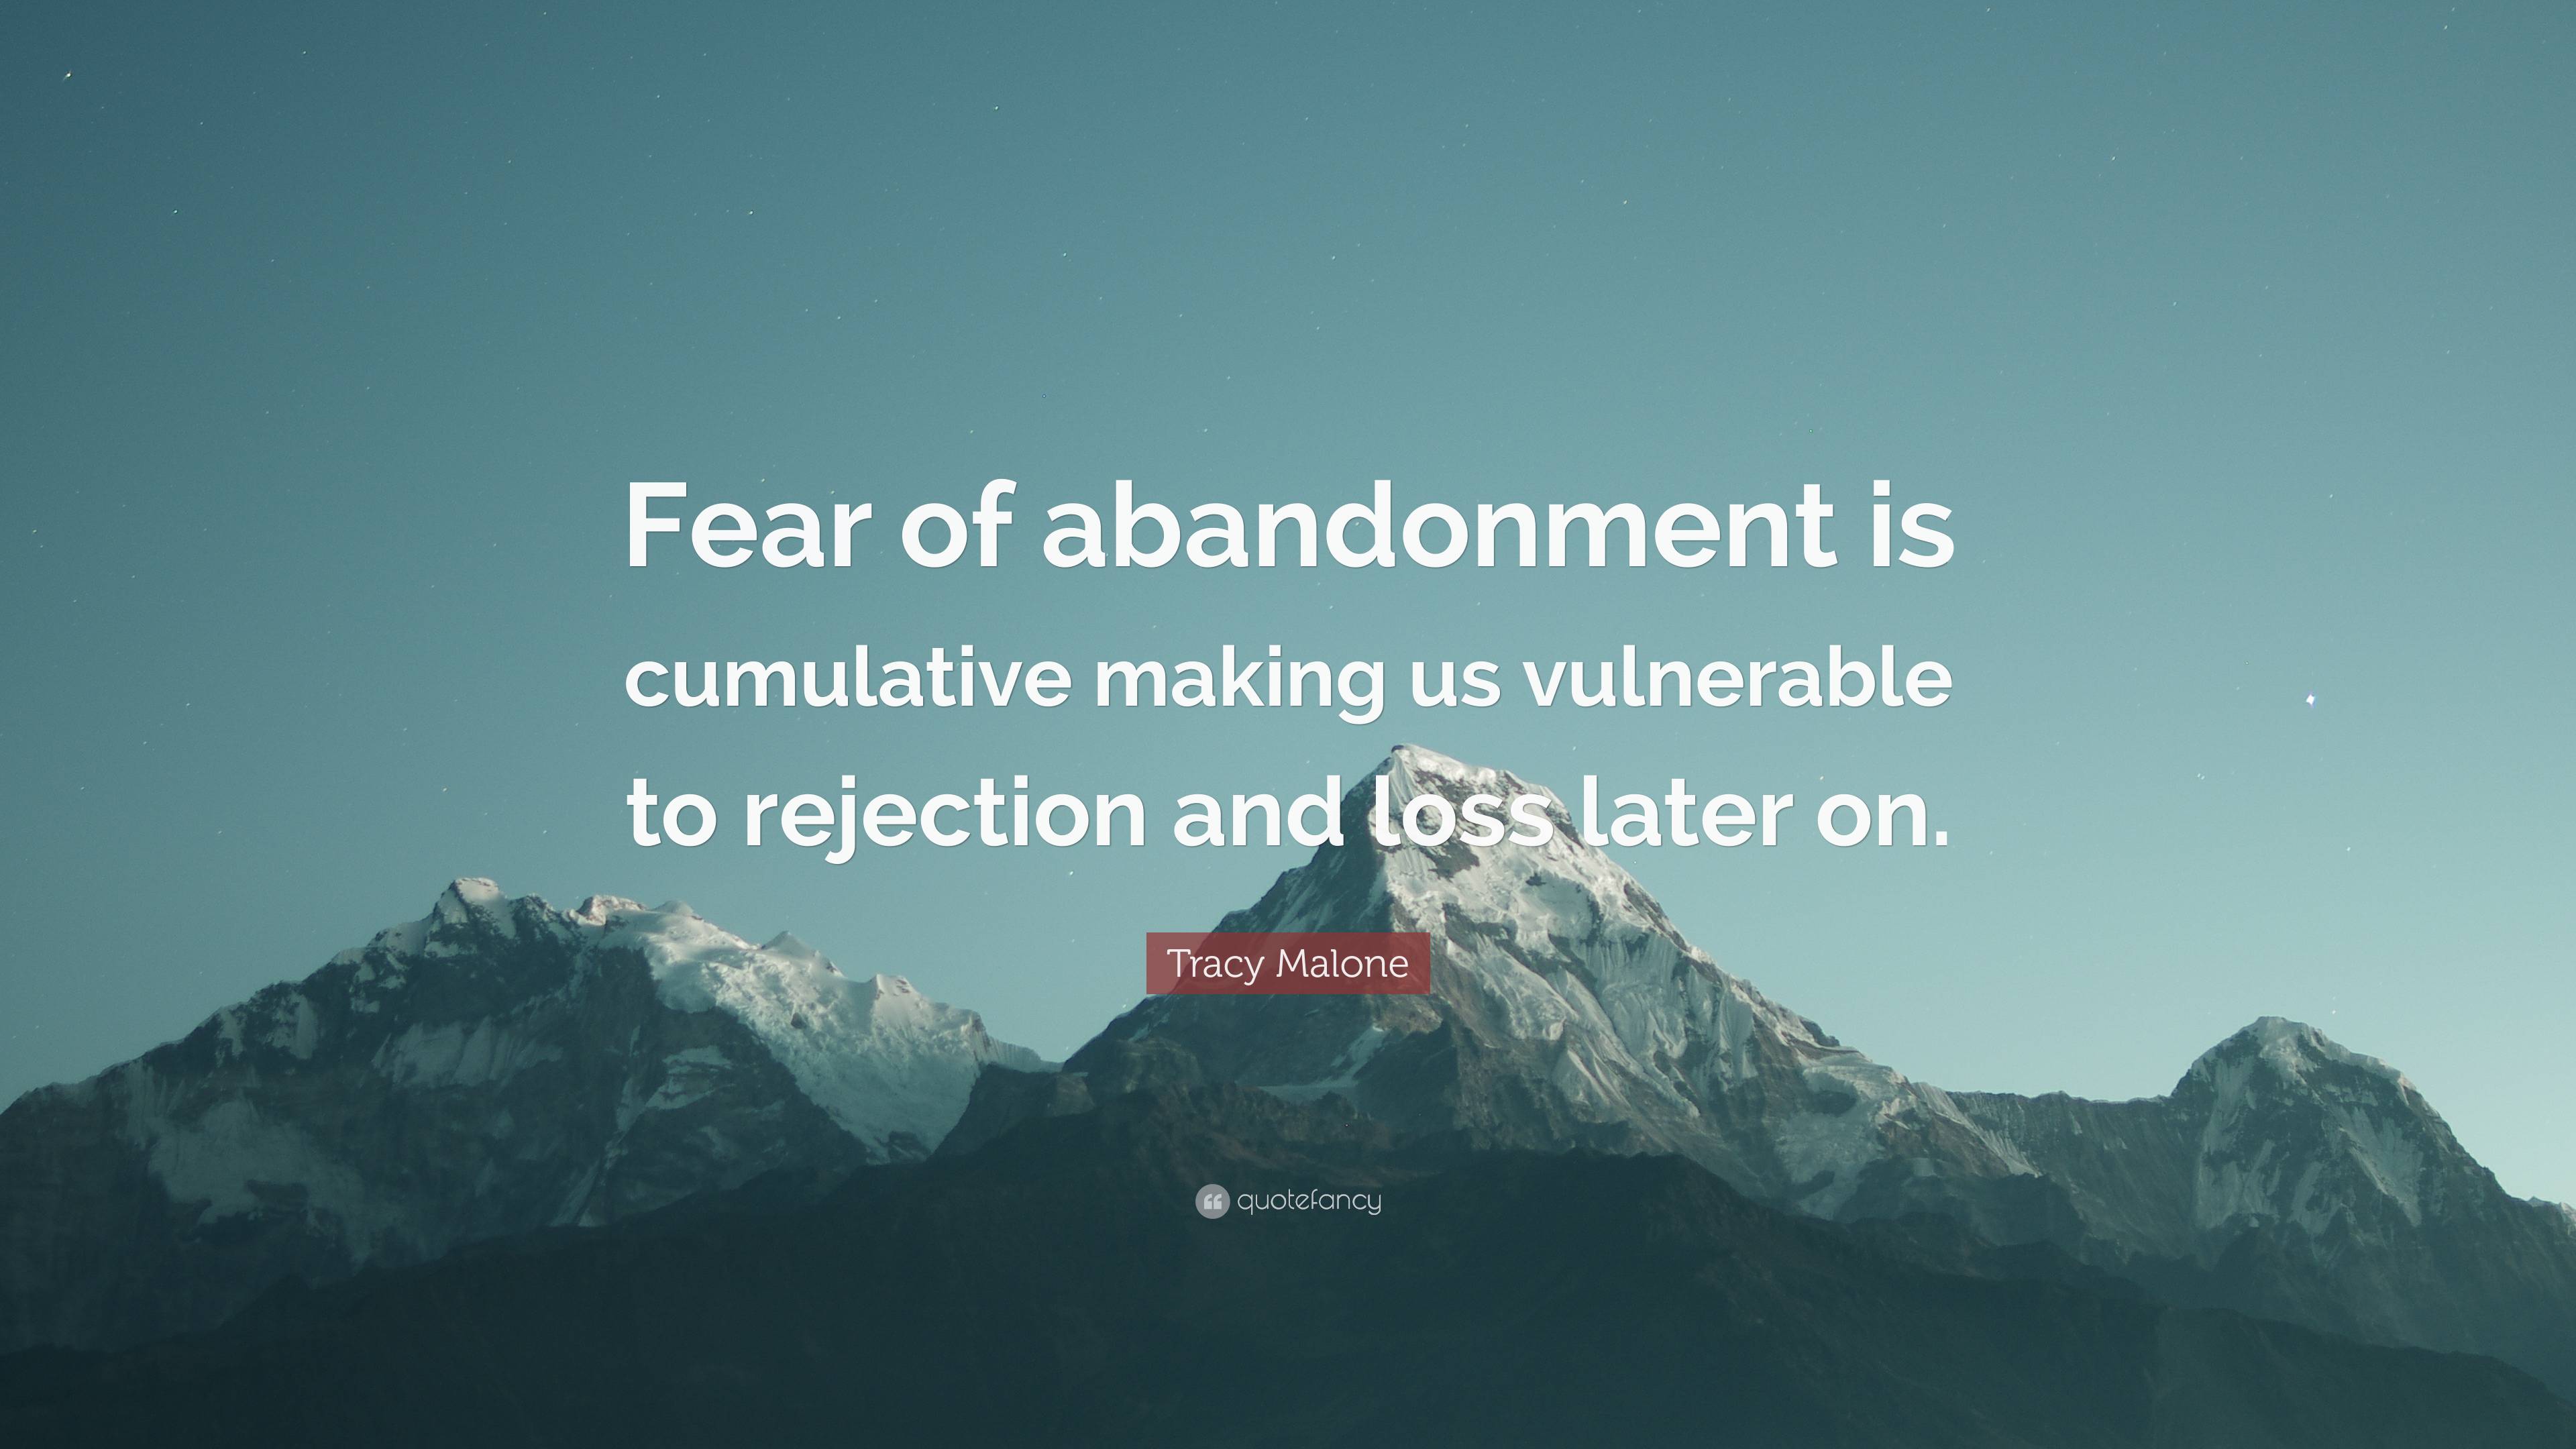 Tracy Malone Quote: “Fear of abandonment is cumulative making us